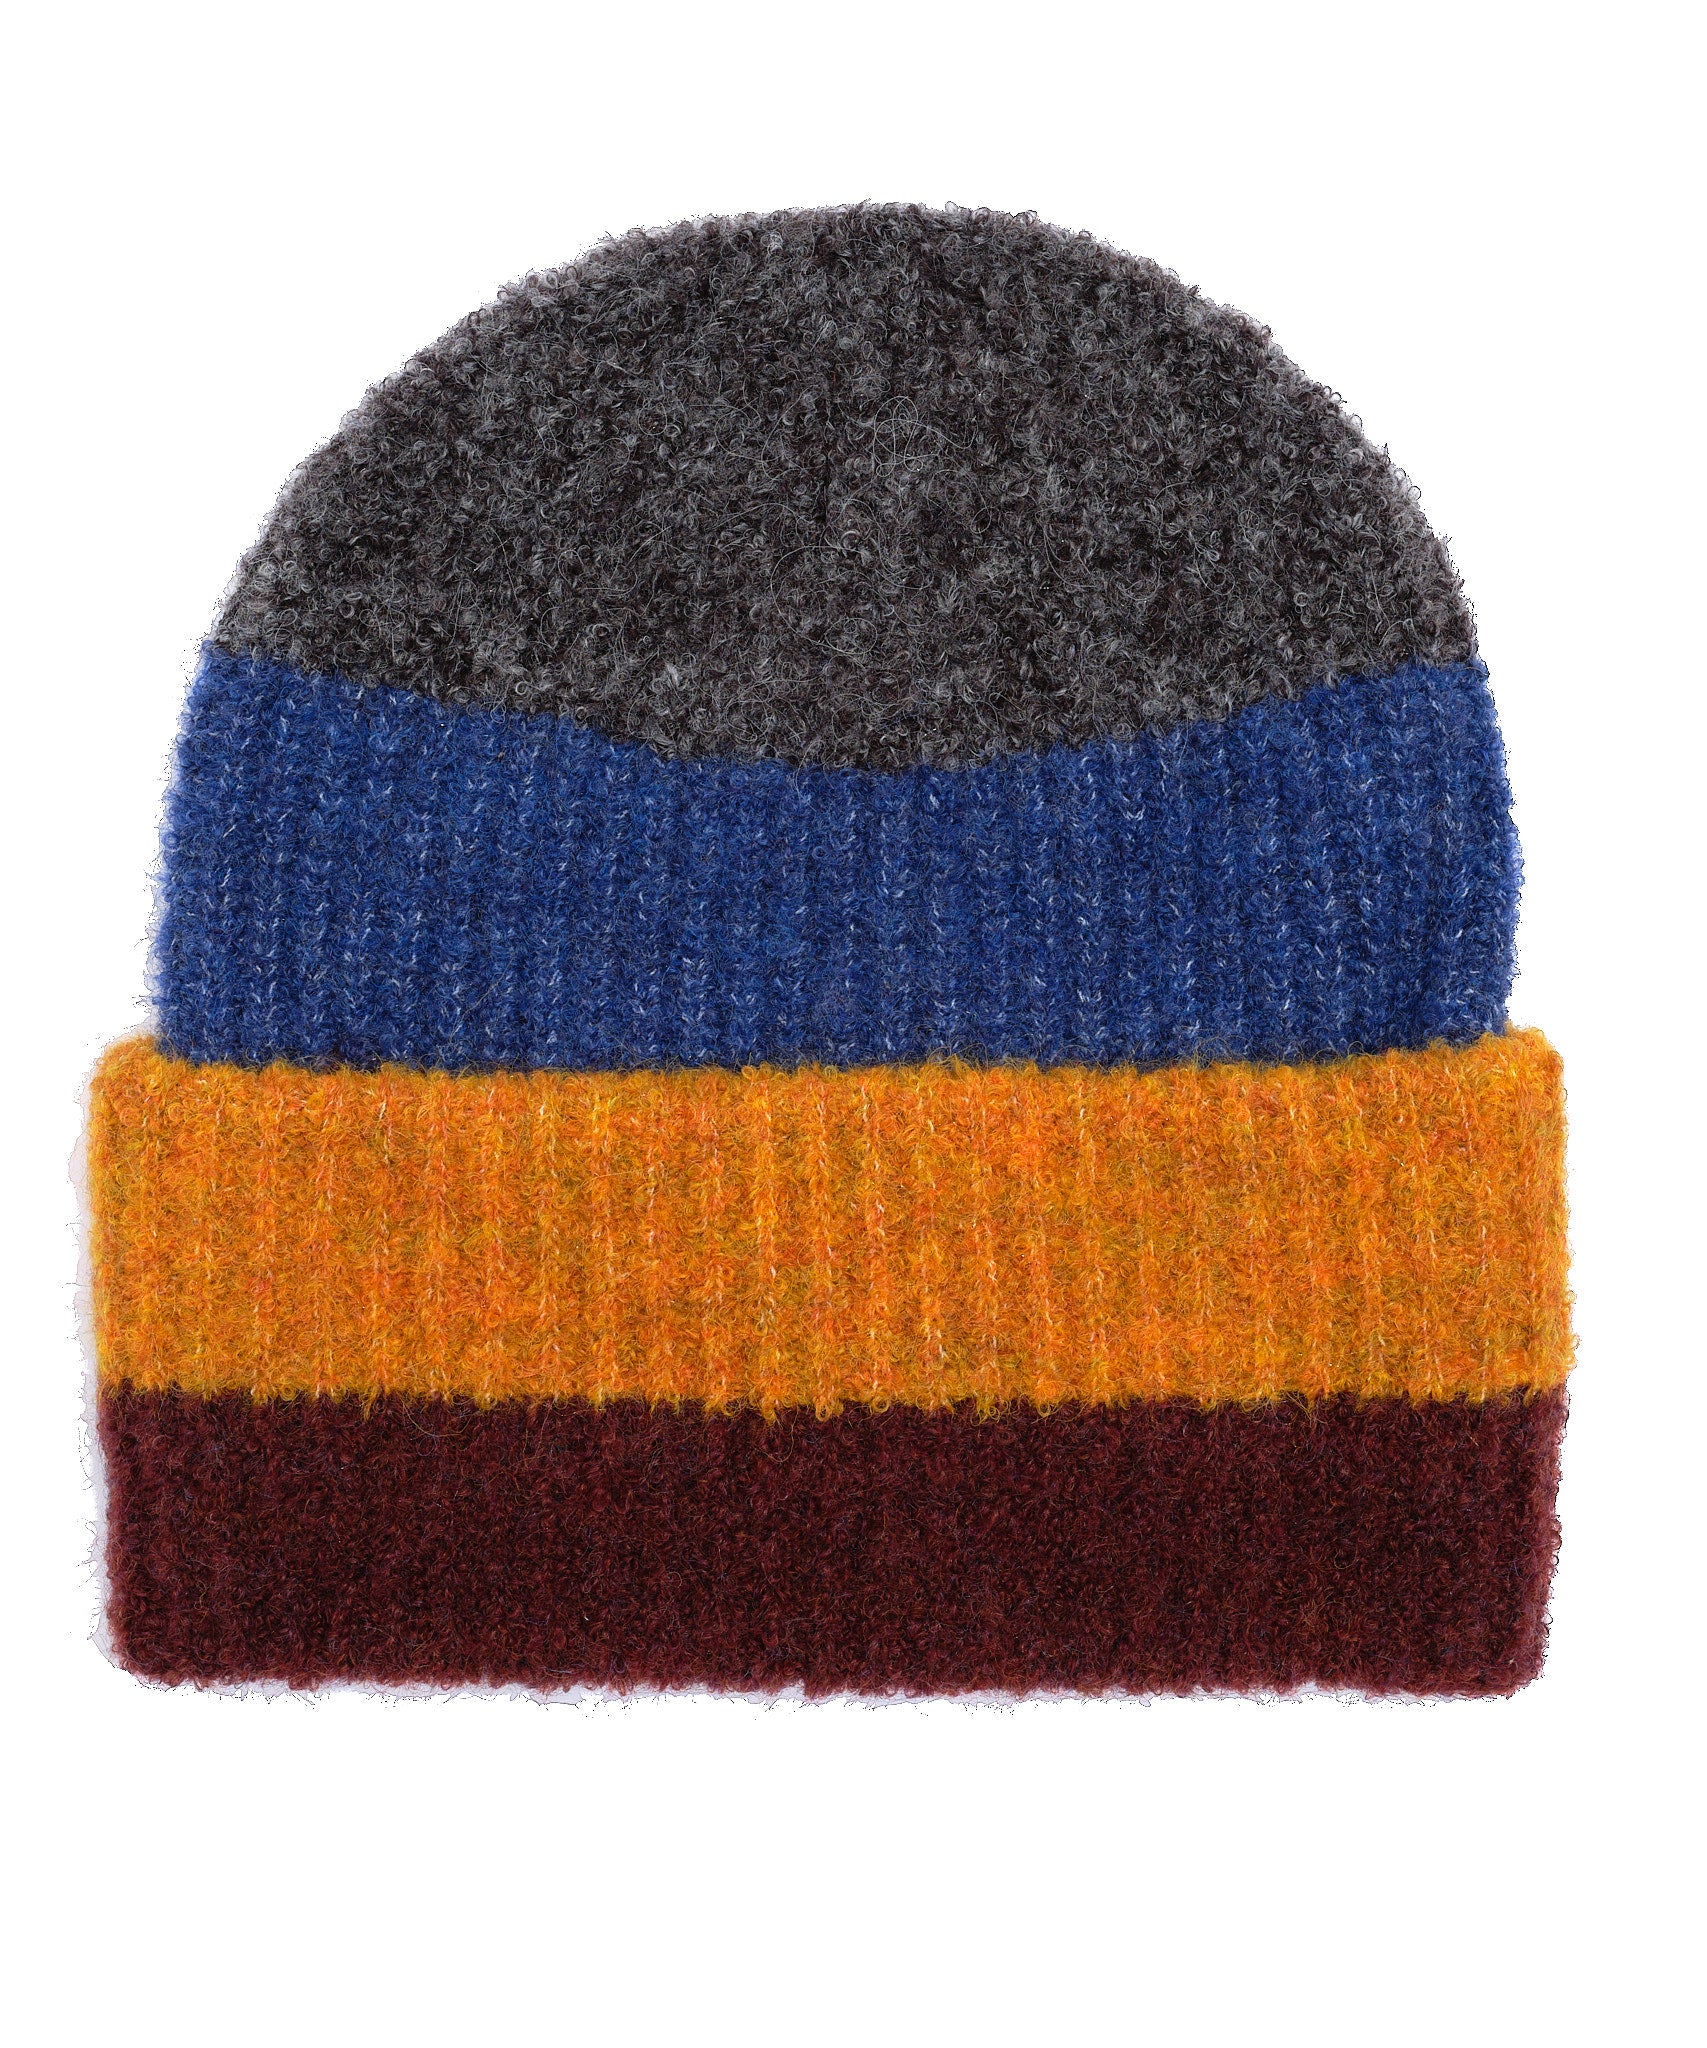 Plush Colorblock Beanie in color Mulled Wine